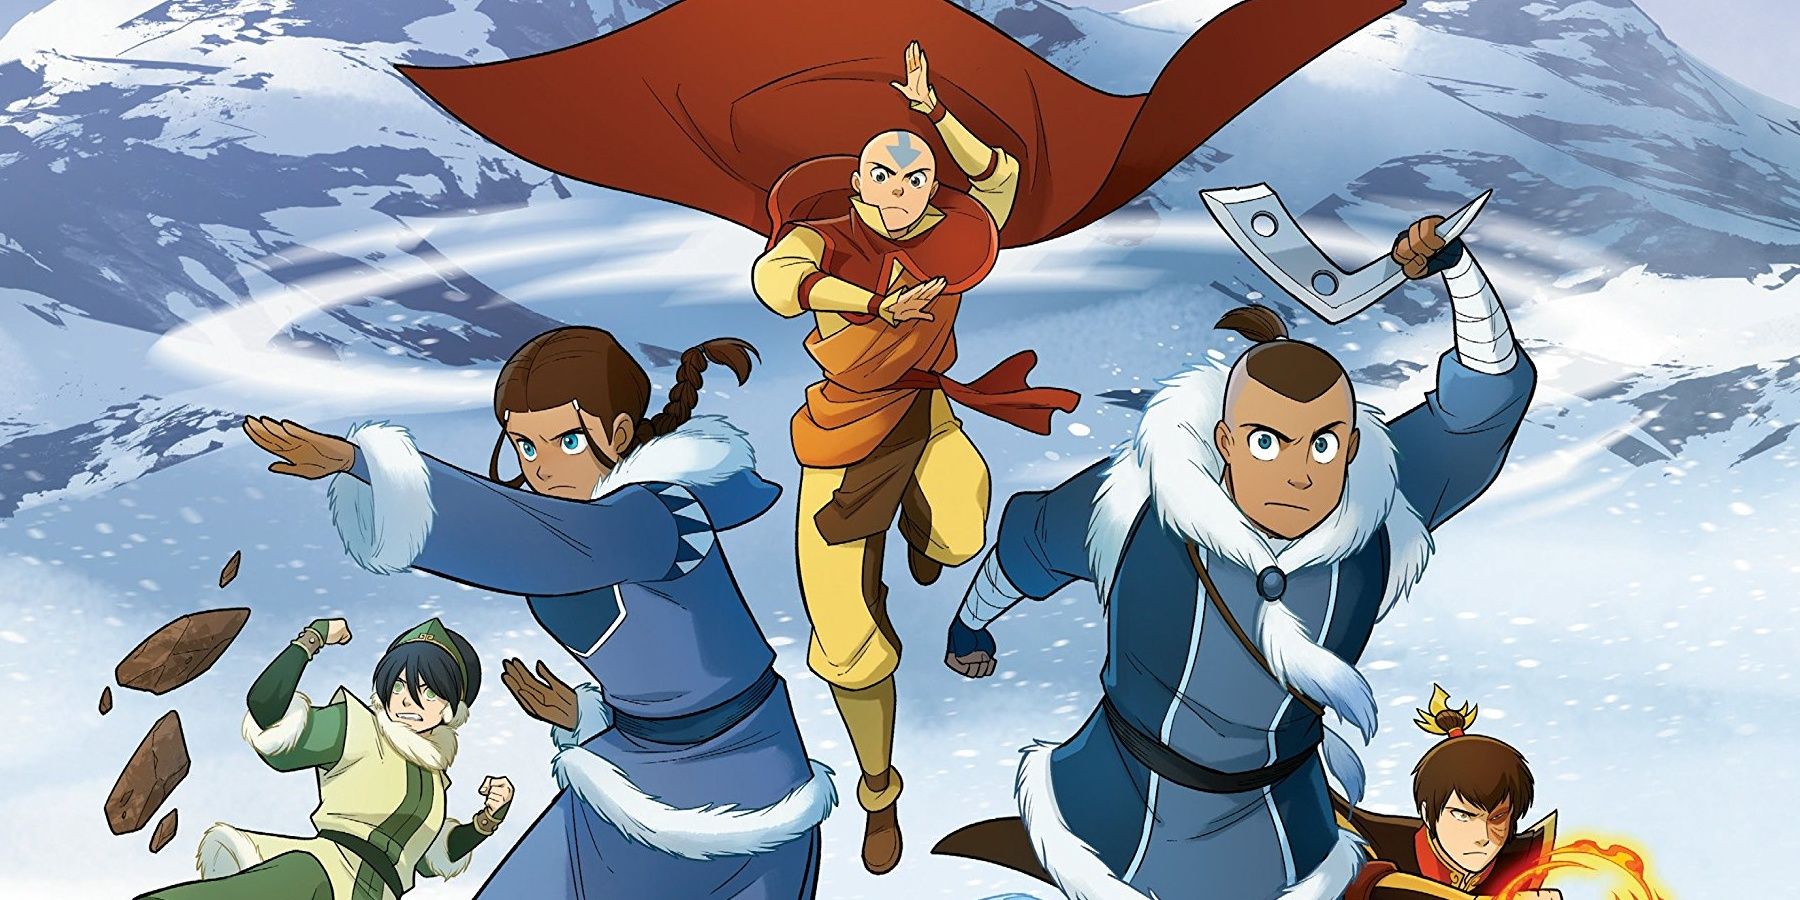 Katara and Sokka running while Aang flies in mid-air on the cover of North and South